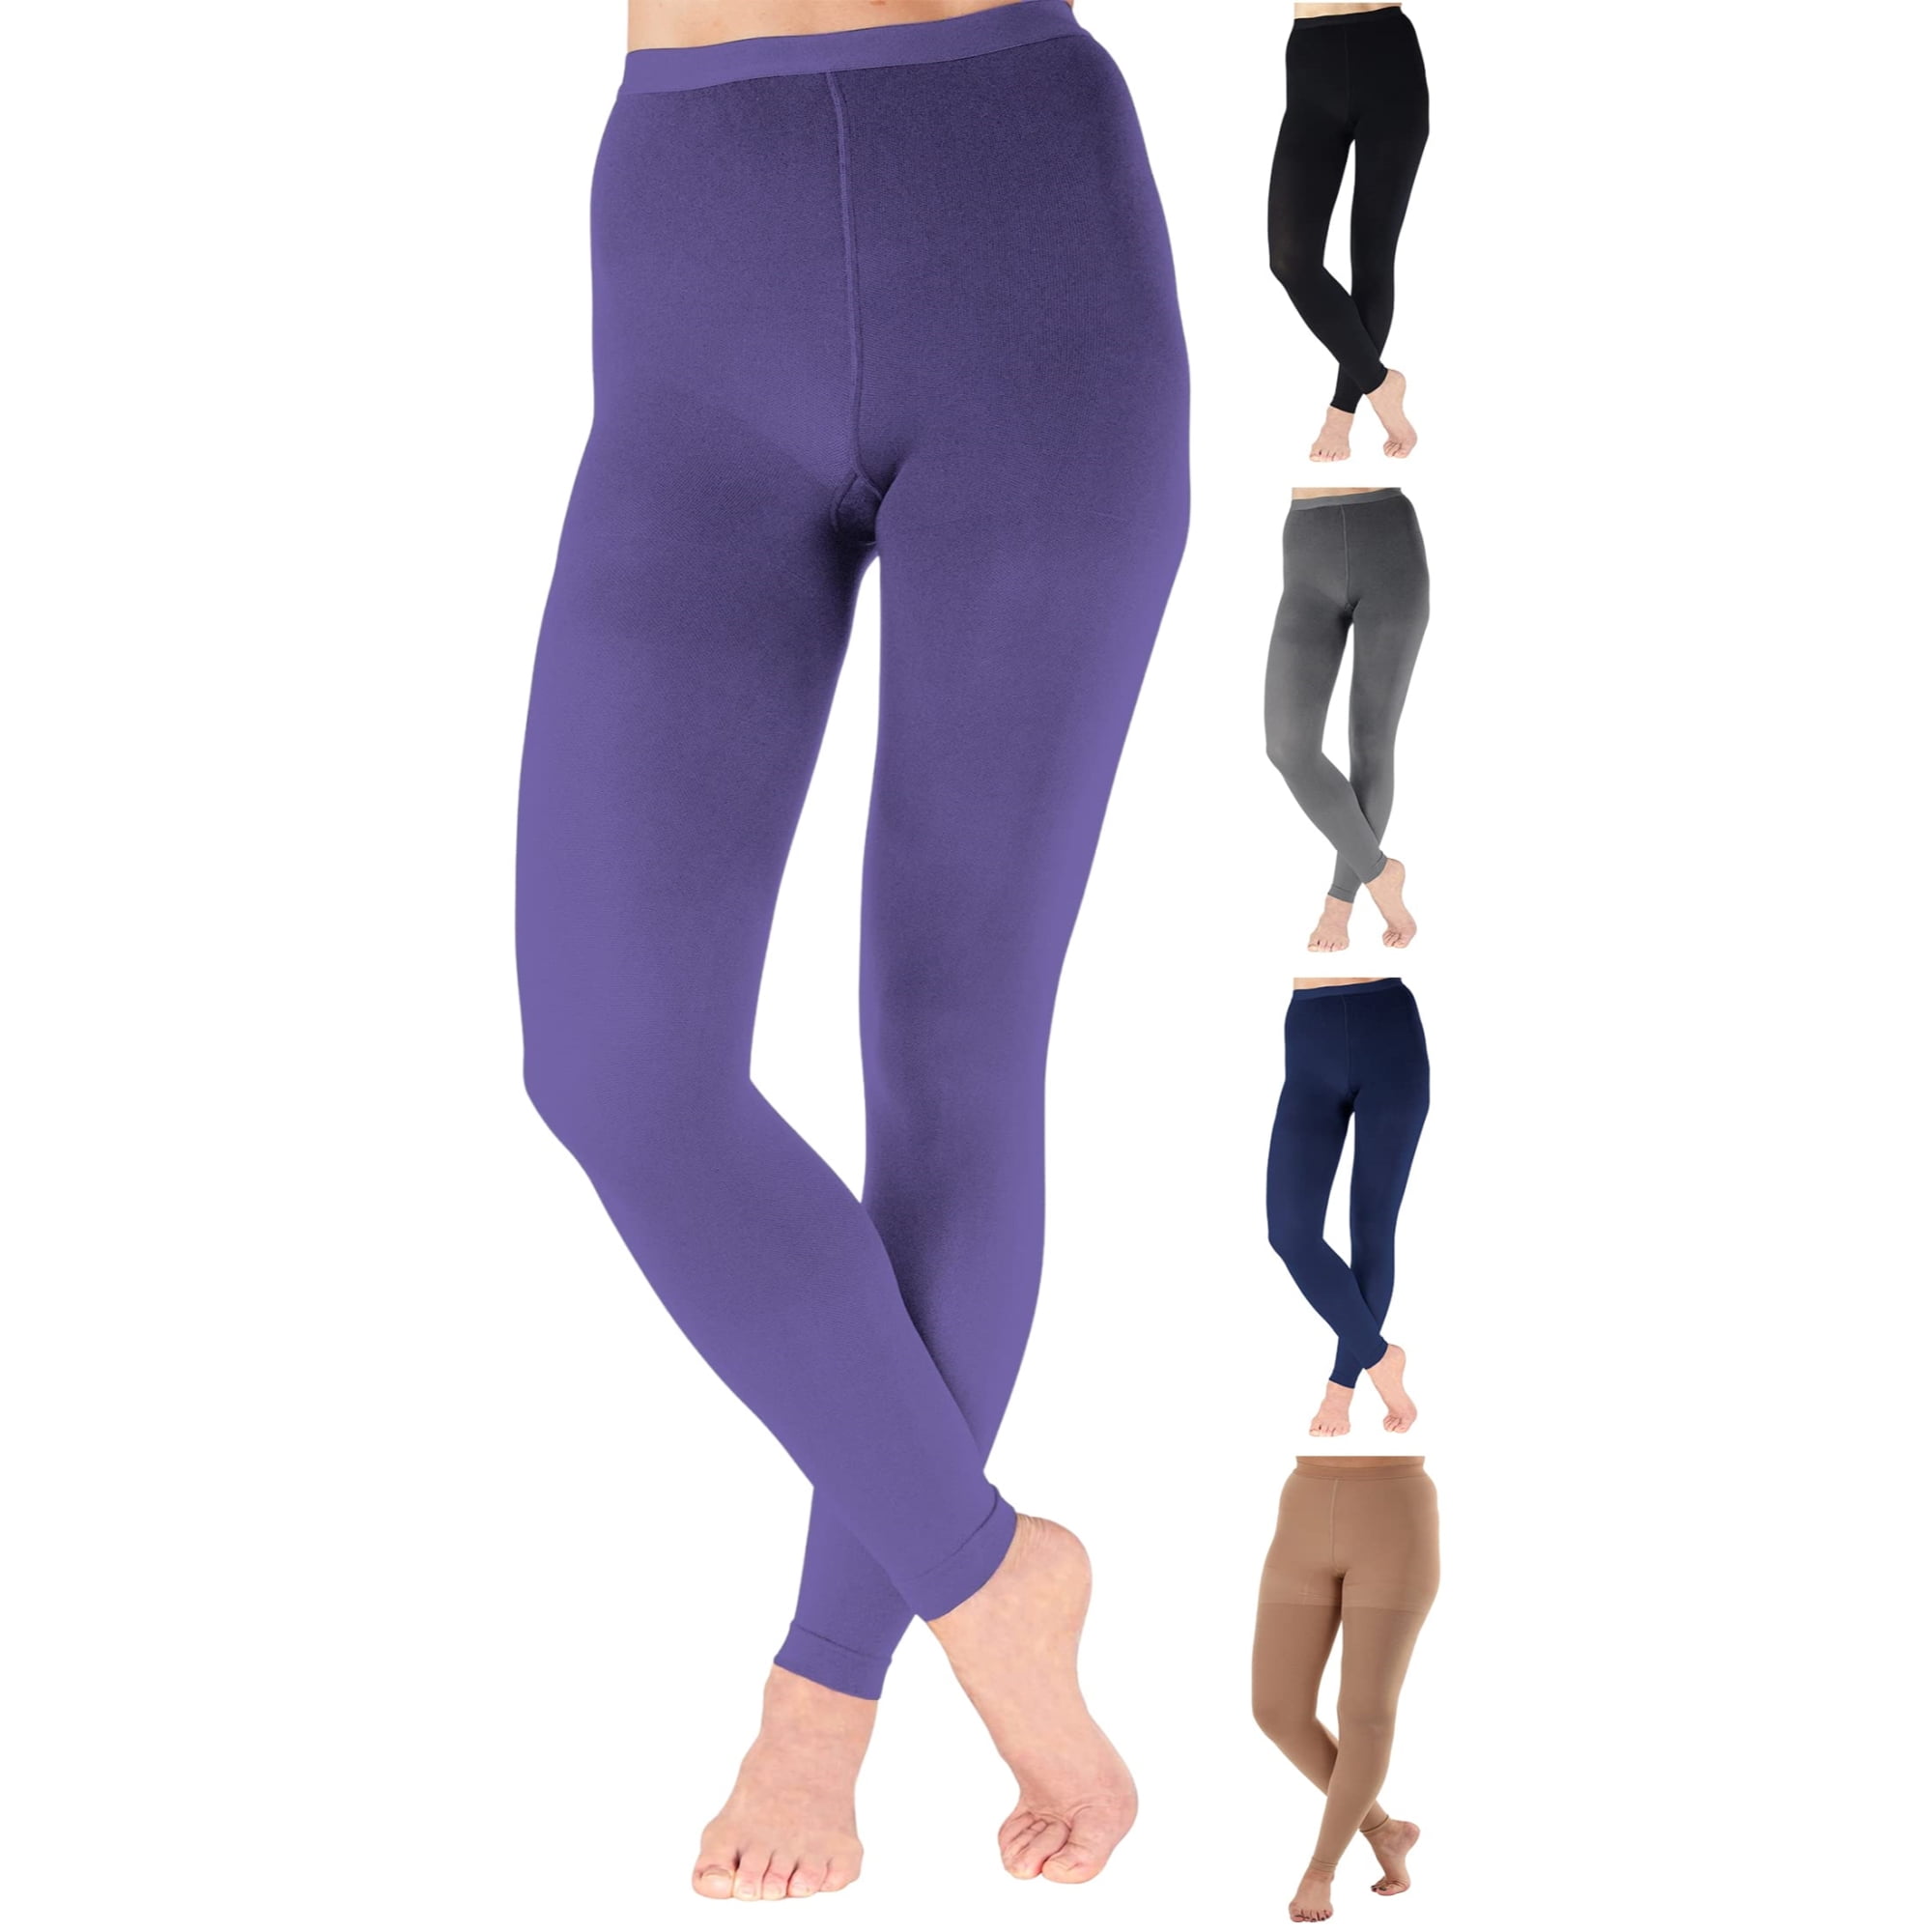 Compression Leggings for Women 20-30mmHg by Absolute Support